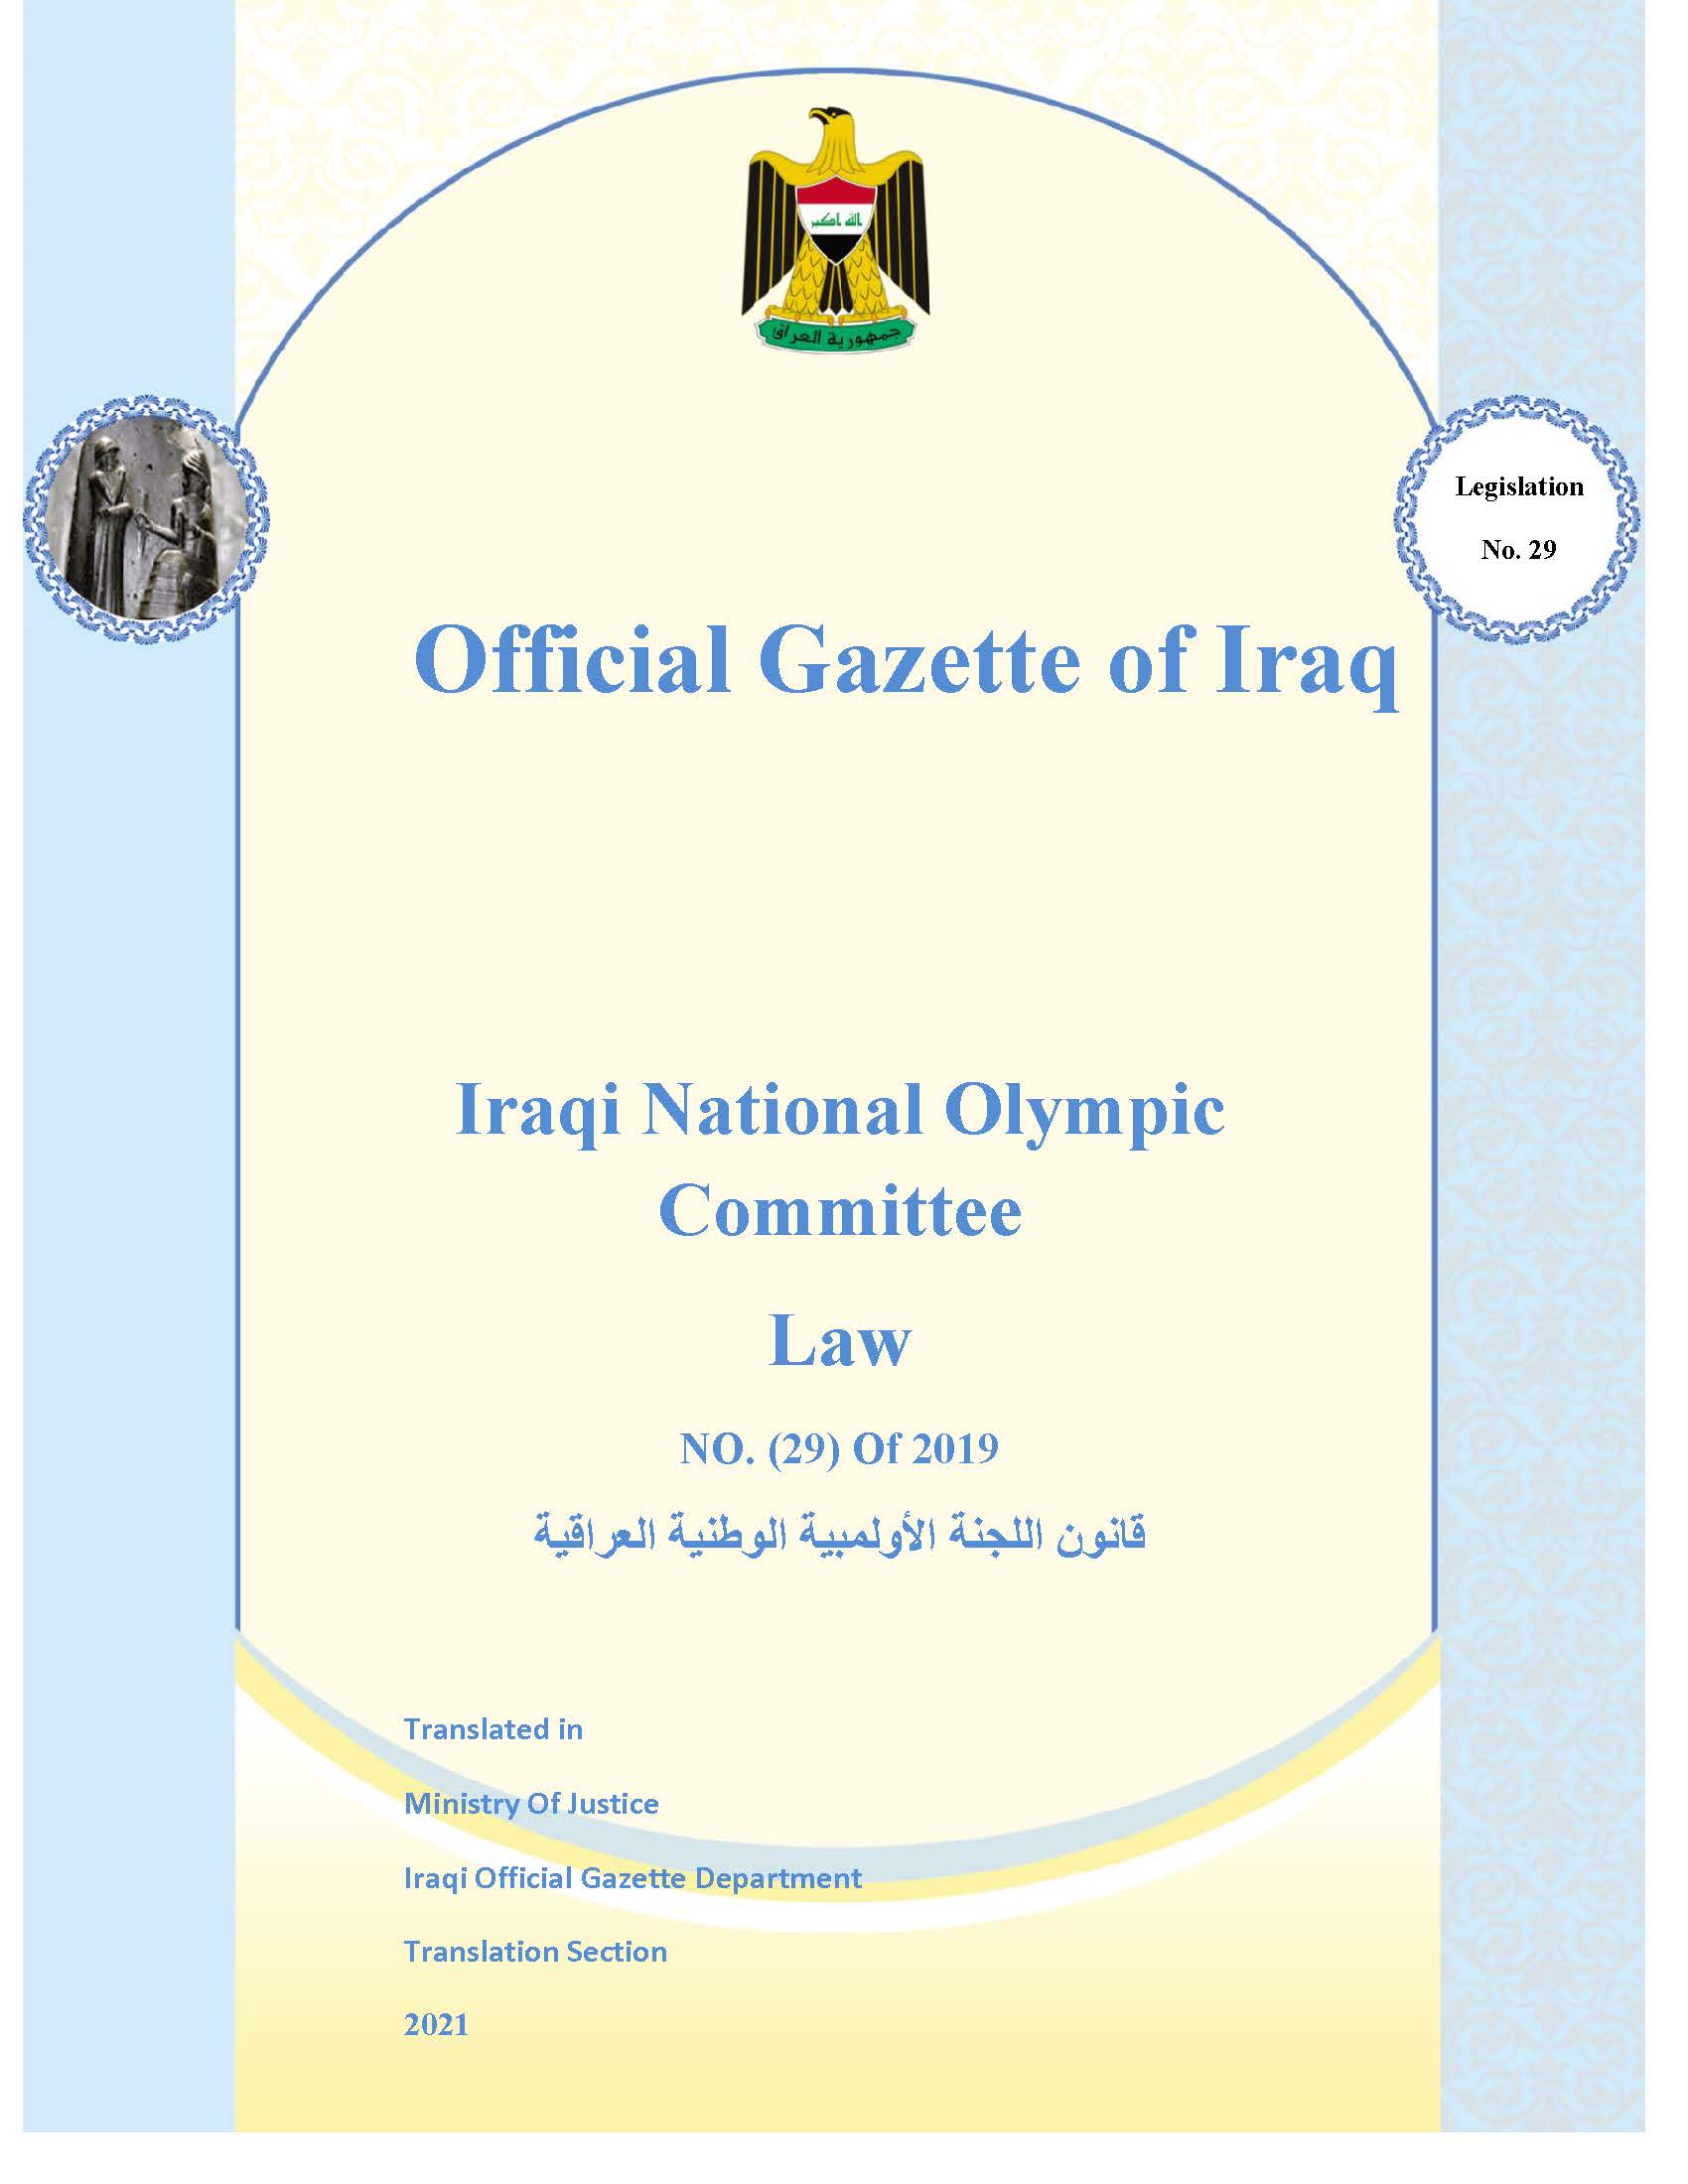 Iraqi National Olympic Committee Law NO. 29 of 2019